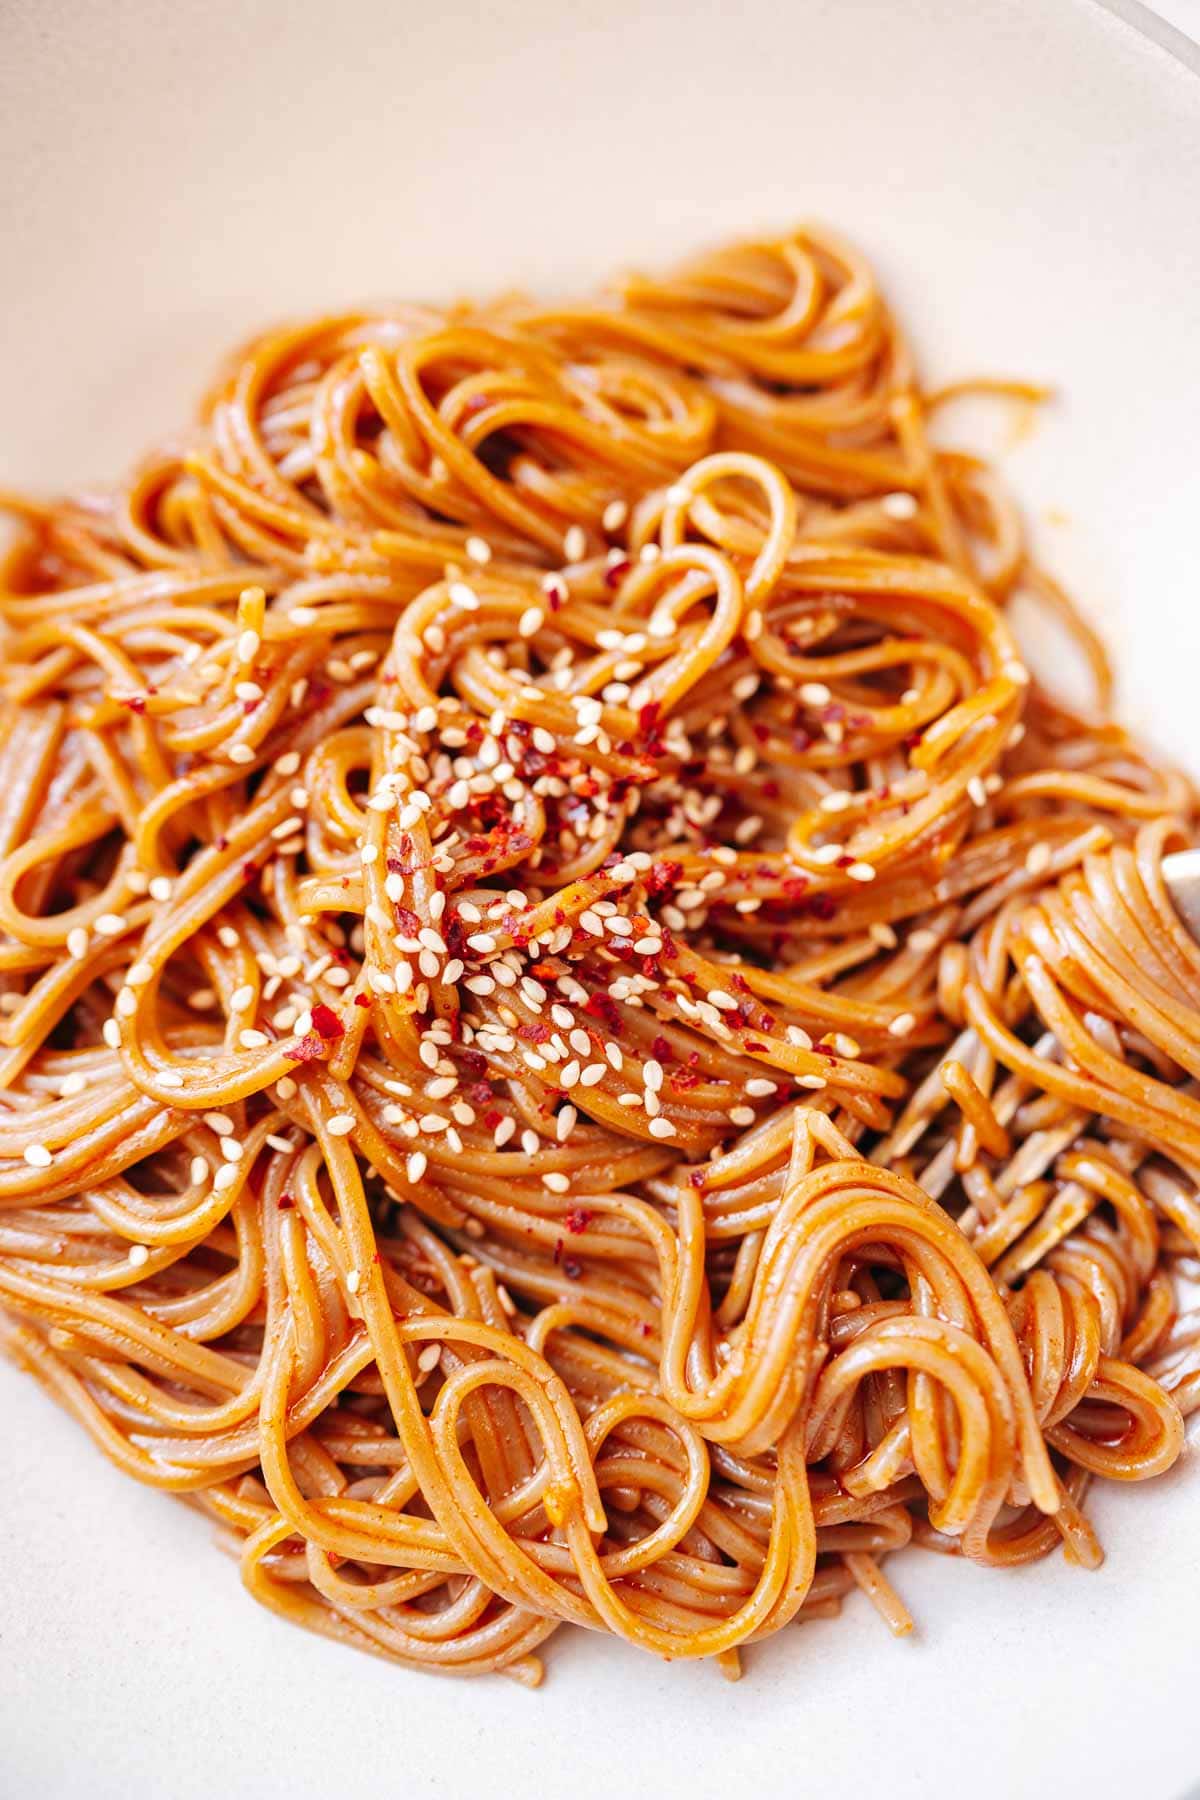 Noodles coated in a red creamy sauce and garnished with seeds and chile flakes.